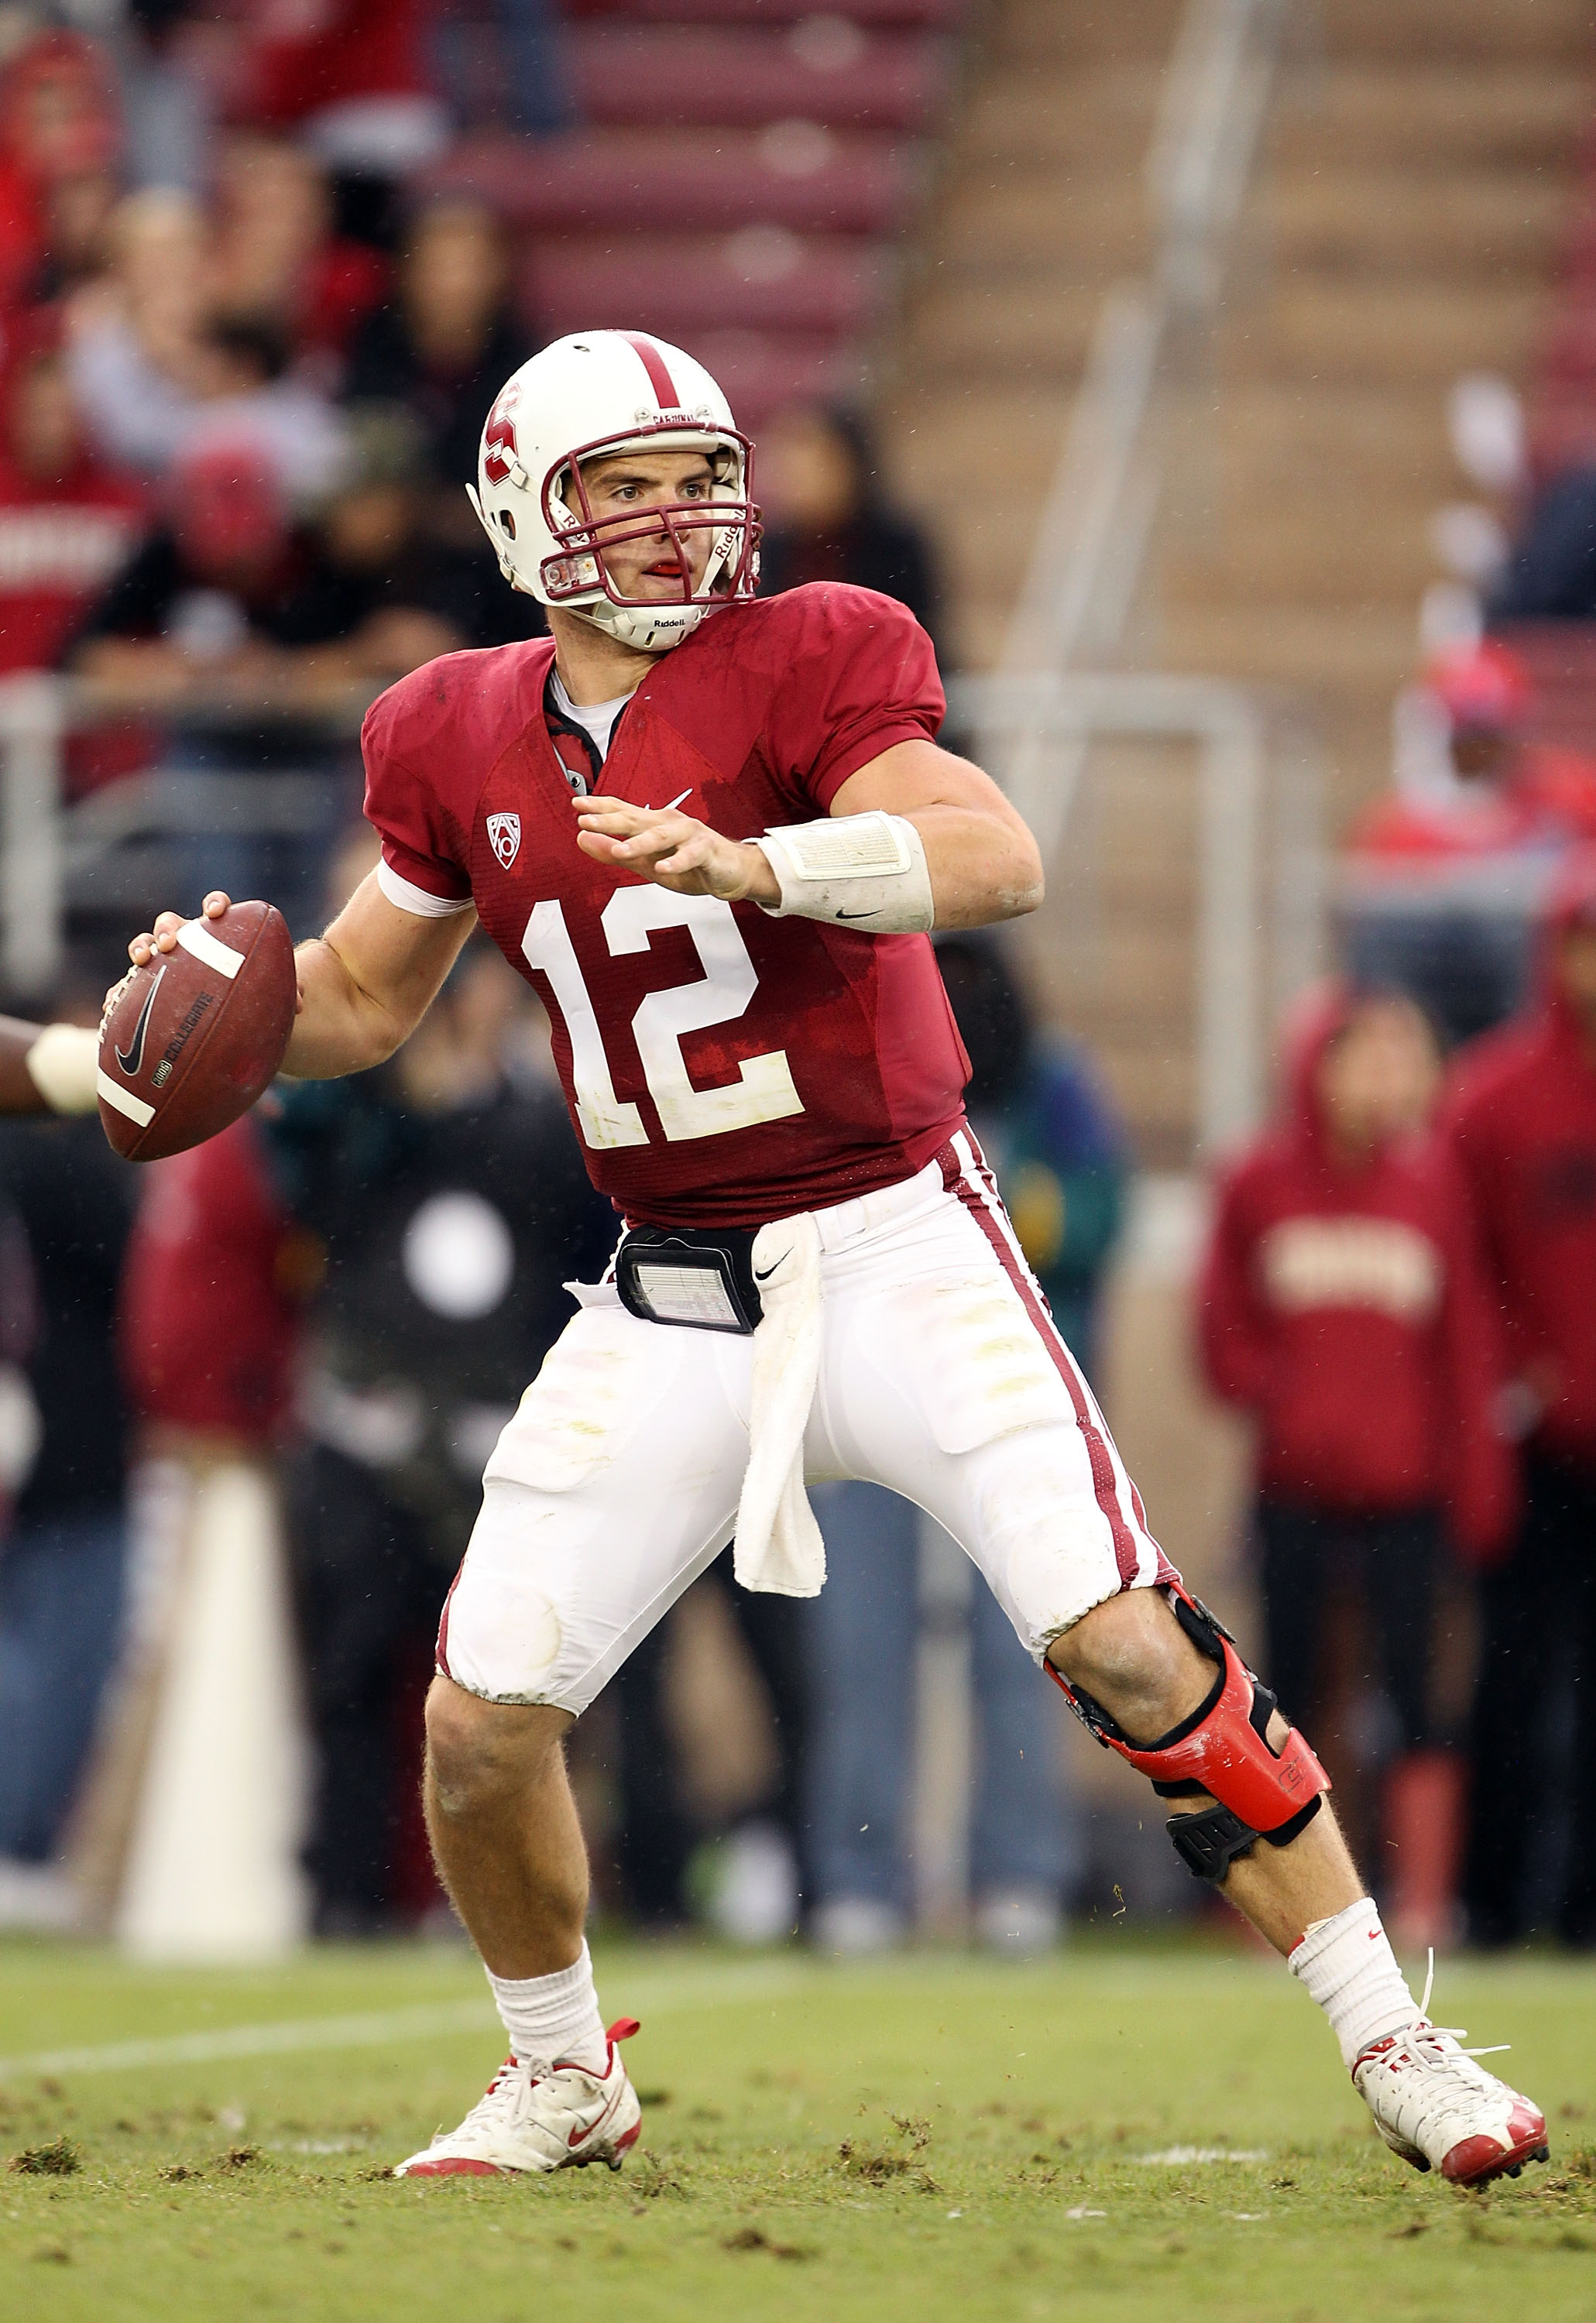 PALO ALTO, CA - OCTOBER 23:  Andrew Luck #12 of the Stanford Cardinal passes the ball against the Washington State Cougars at Stanford Stadium on October 23, 2010 in Palo Alto, California.  (Photo by Ezra Shaw/Getty Images)